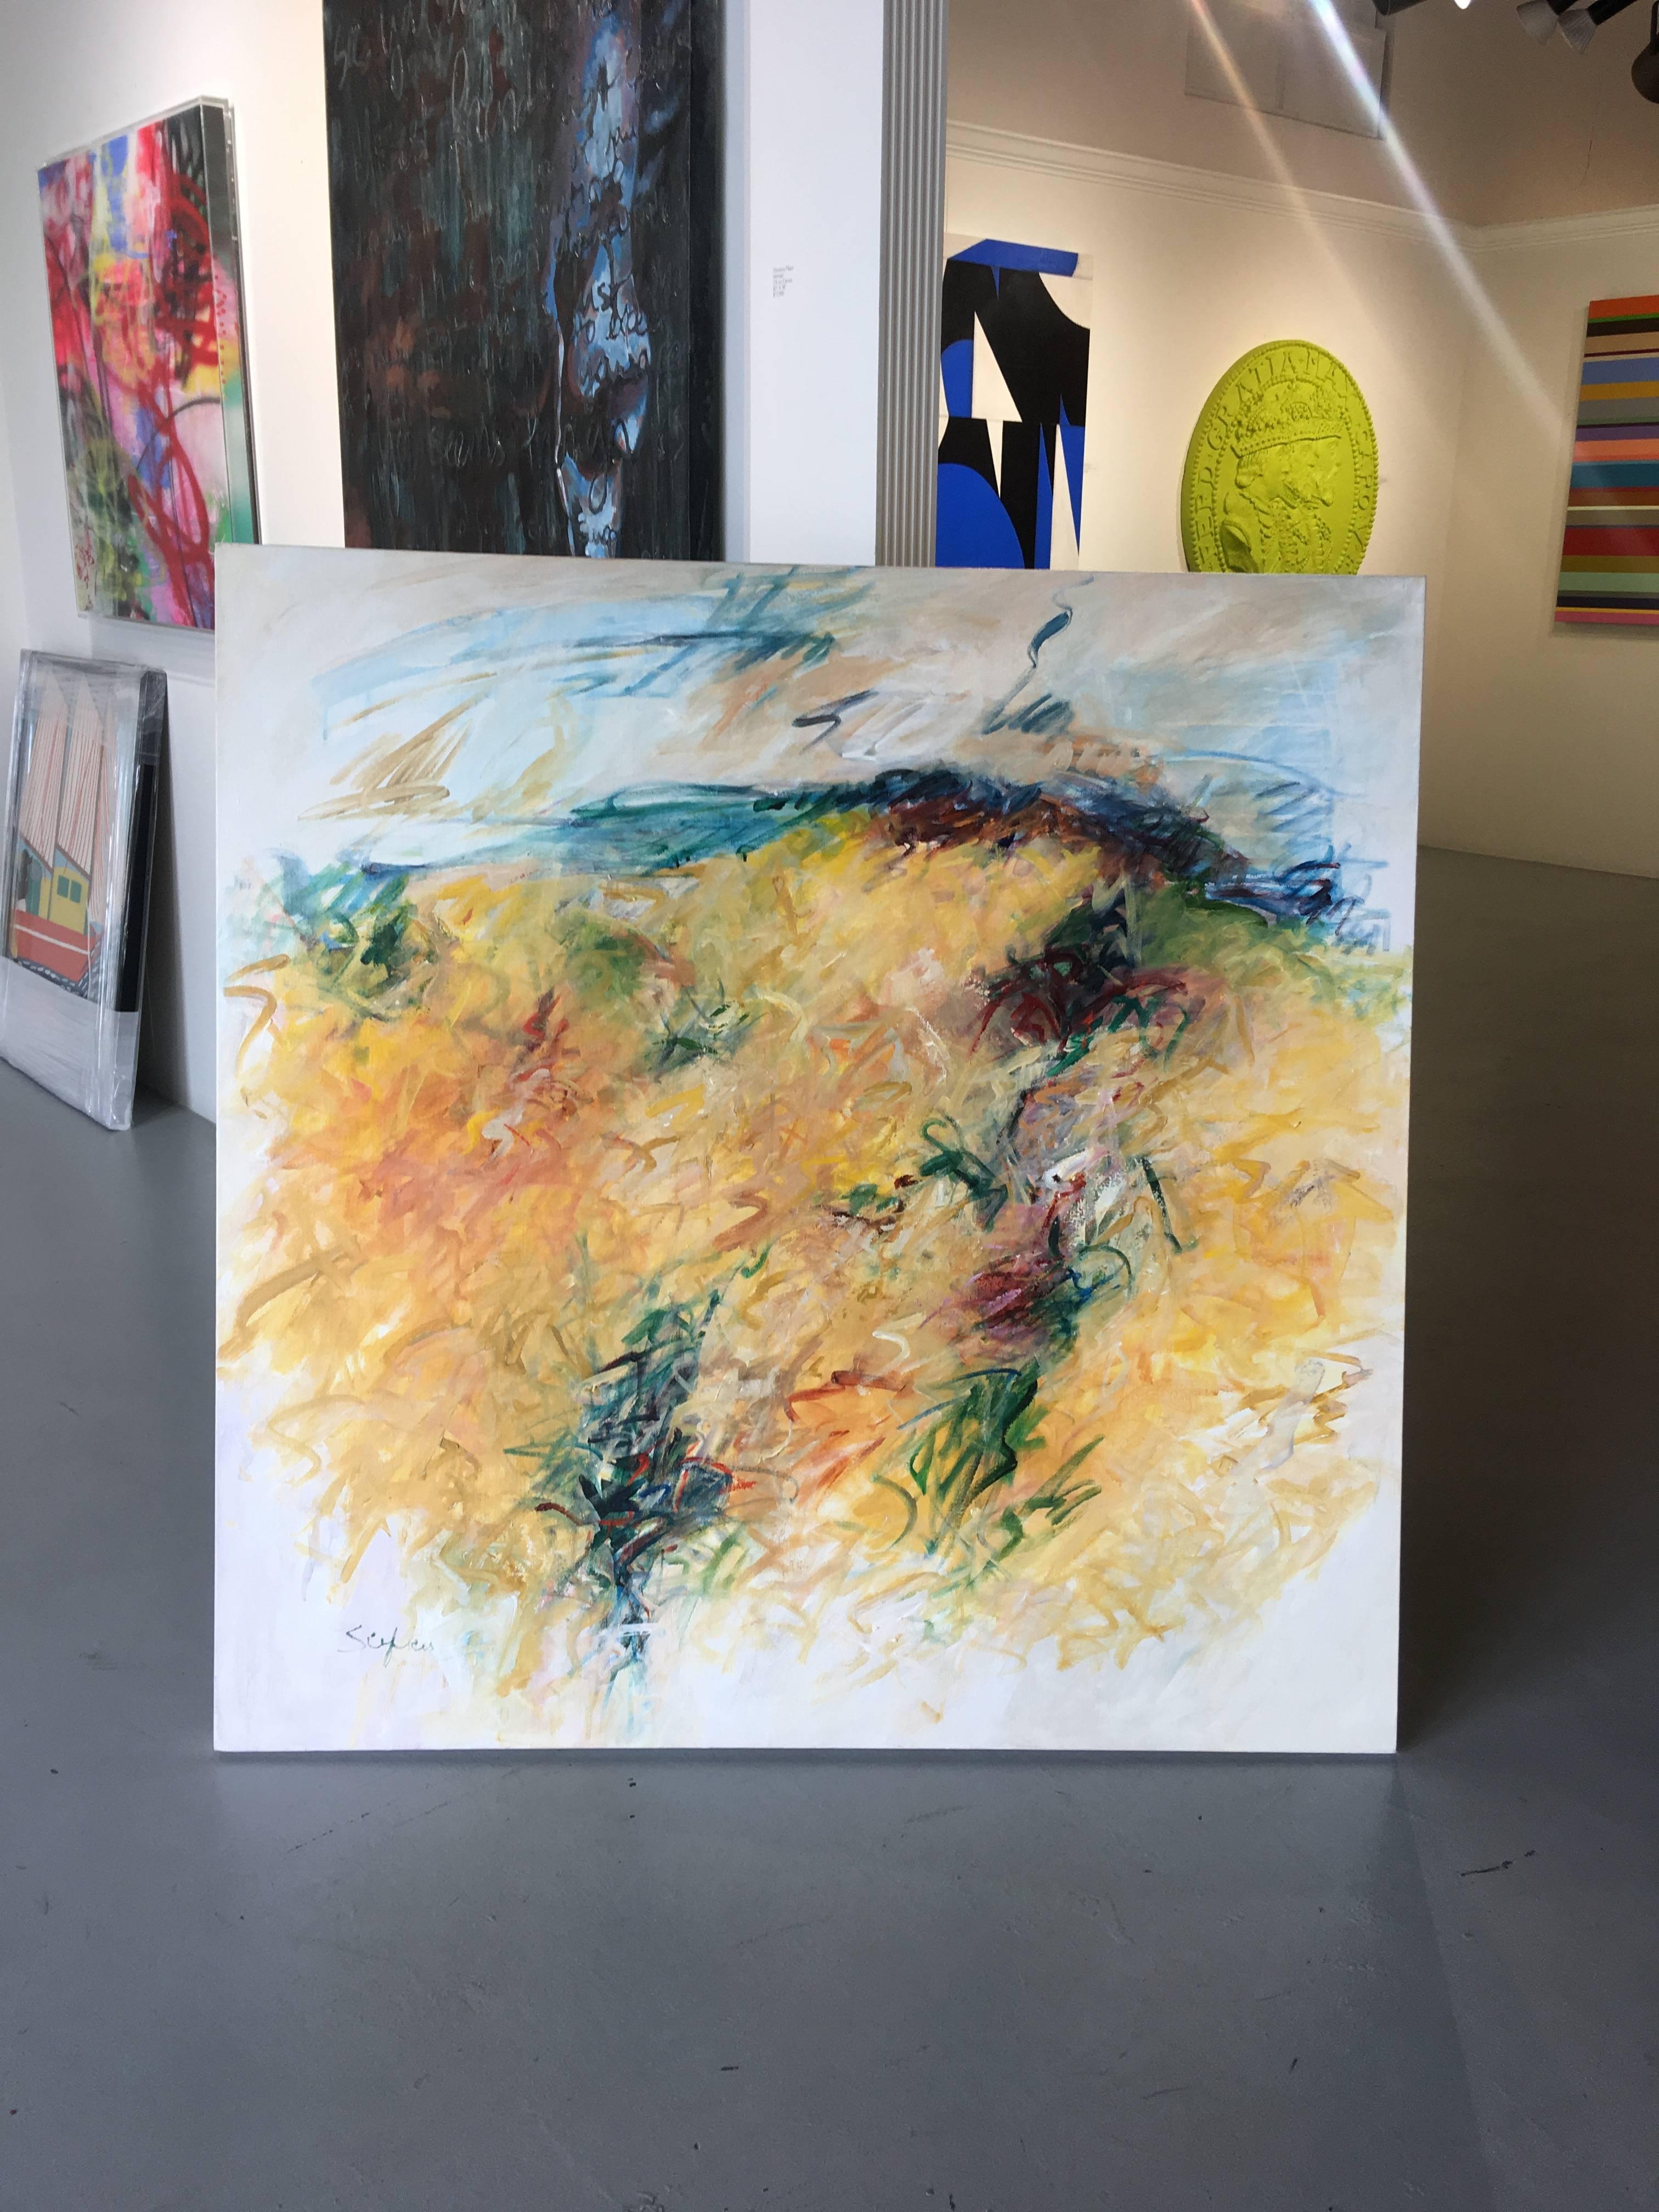 Vibrant mustard yellow painting with deep blue, green values flush with foreground. 

Mary Lou Siefker is 87 year old Broward County Artist that has been exhibiting her work since 1977. She has won numerous awards and fellowships. “Her canvases